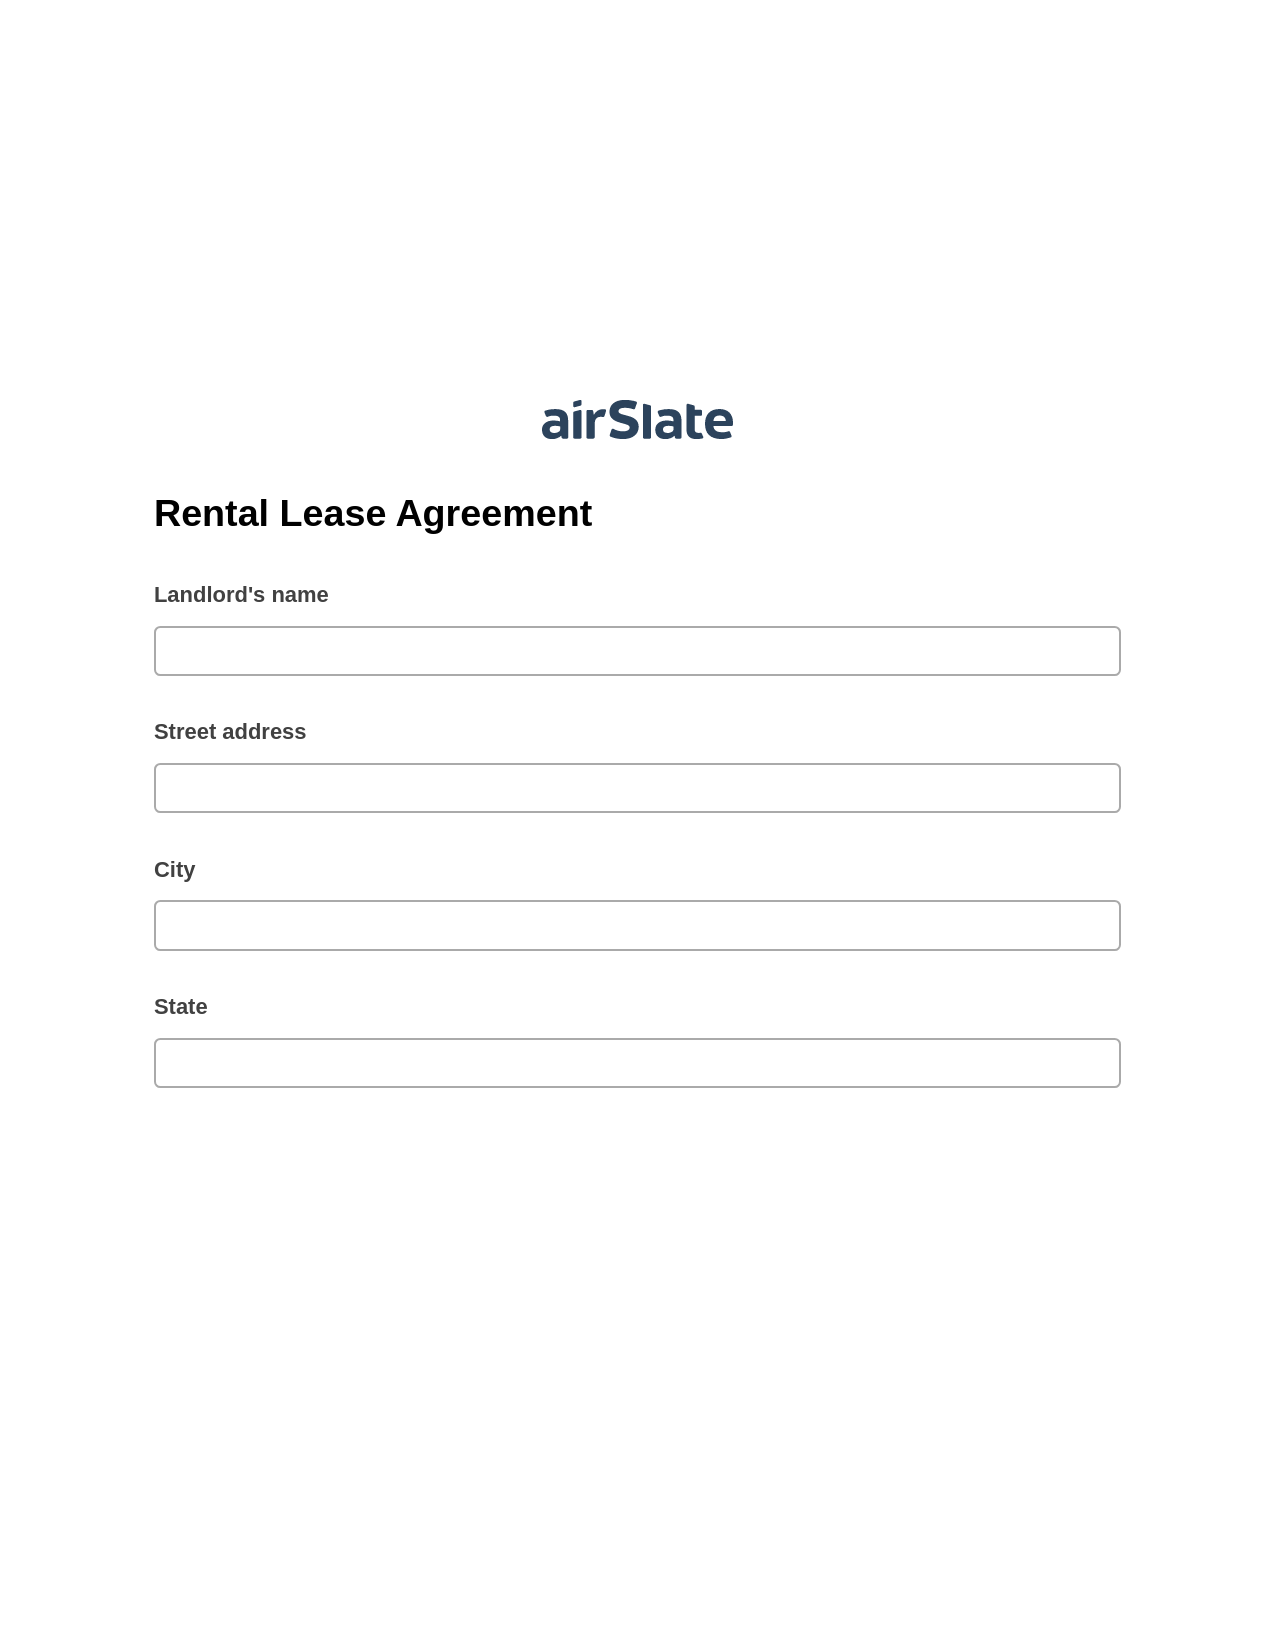 Rental Lease Agreement Pre-fill from CSV File Bot, Create Slate Reminder Bot, Export to Google Sheet Bot